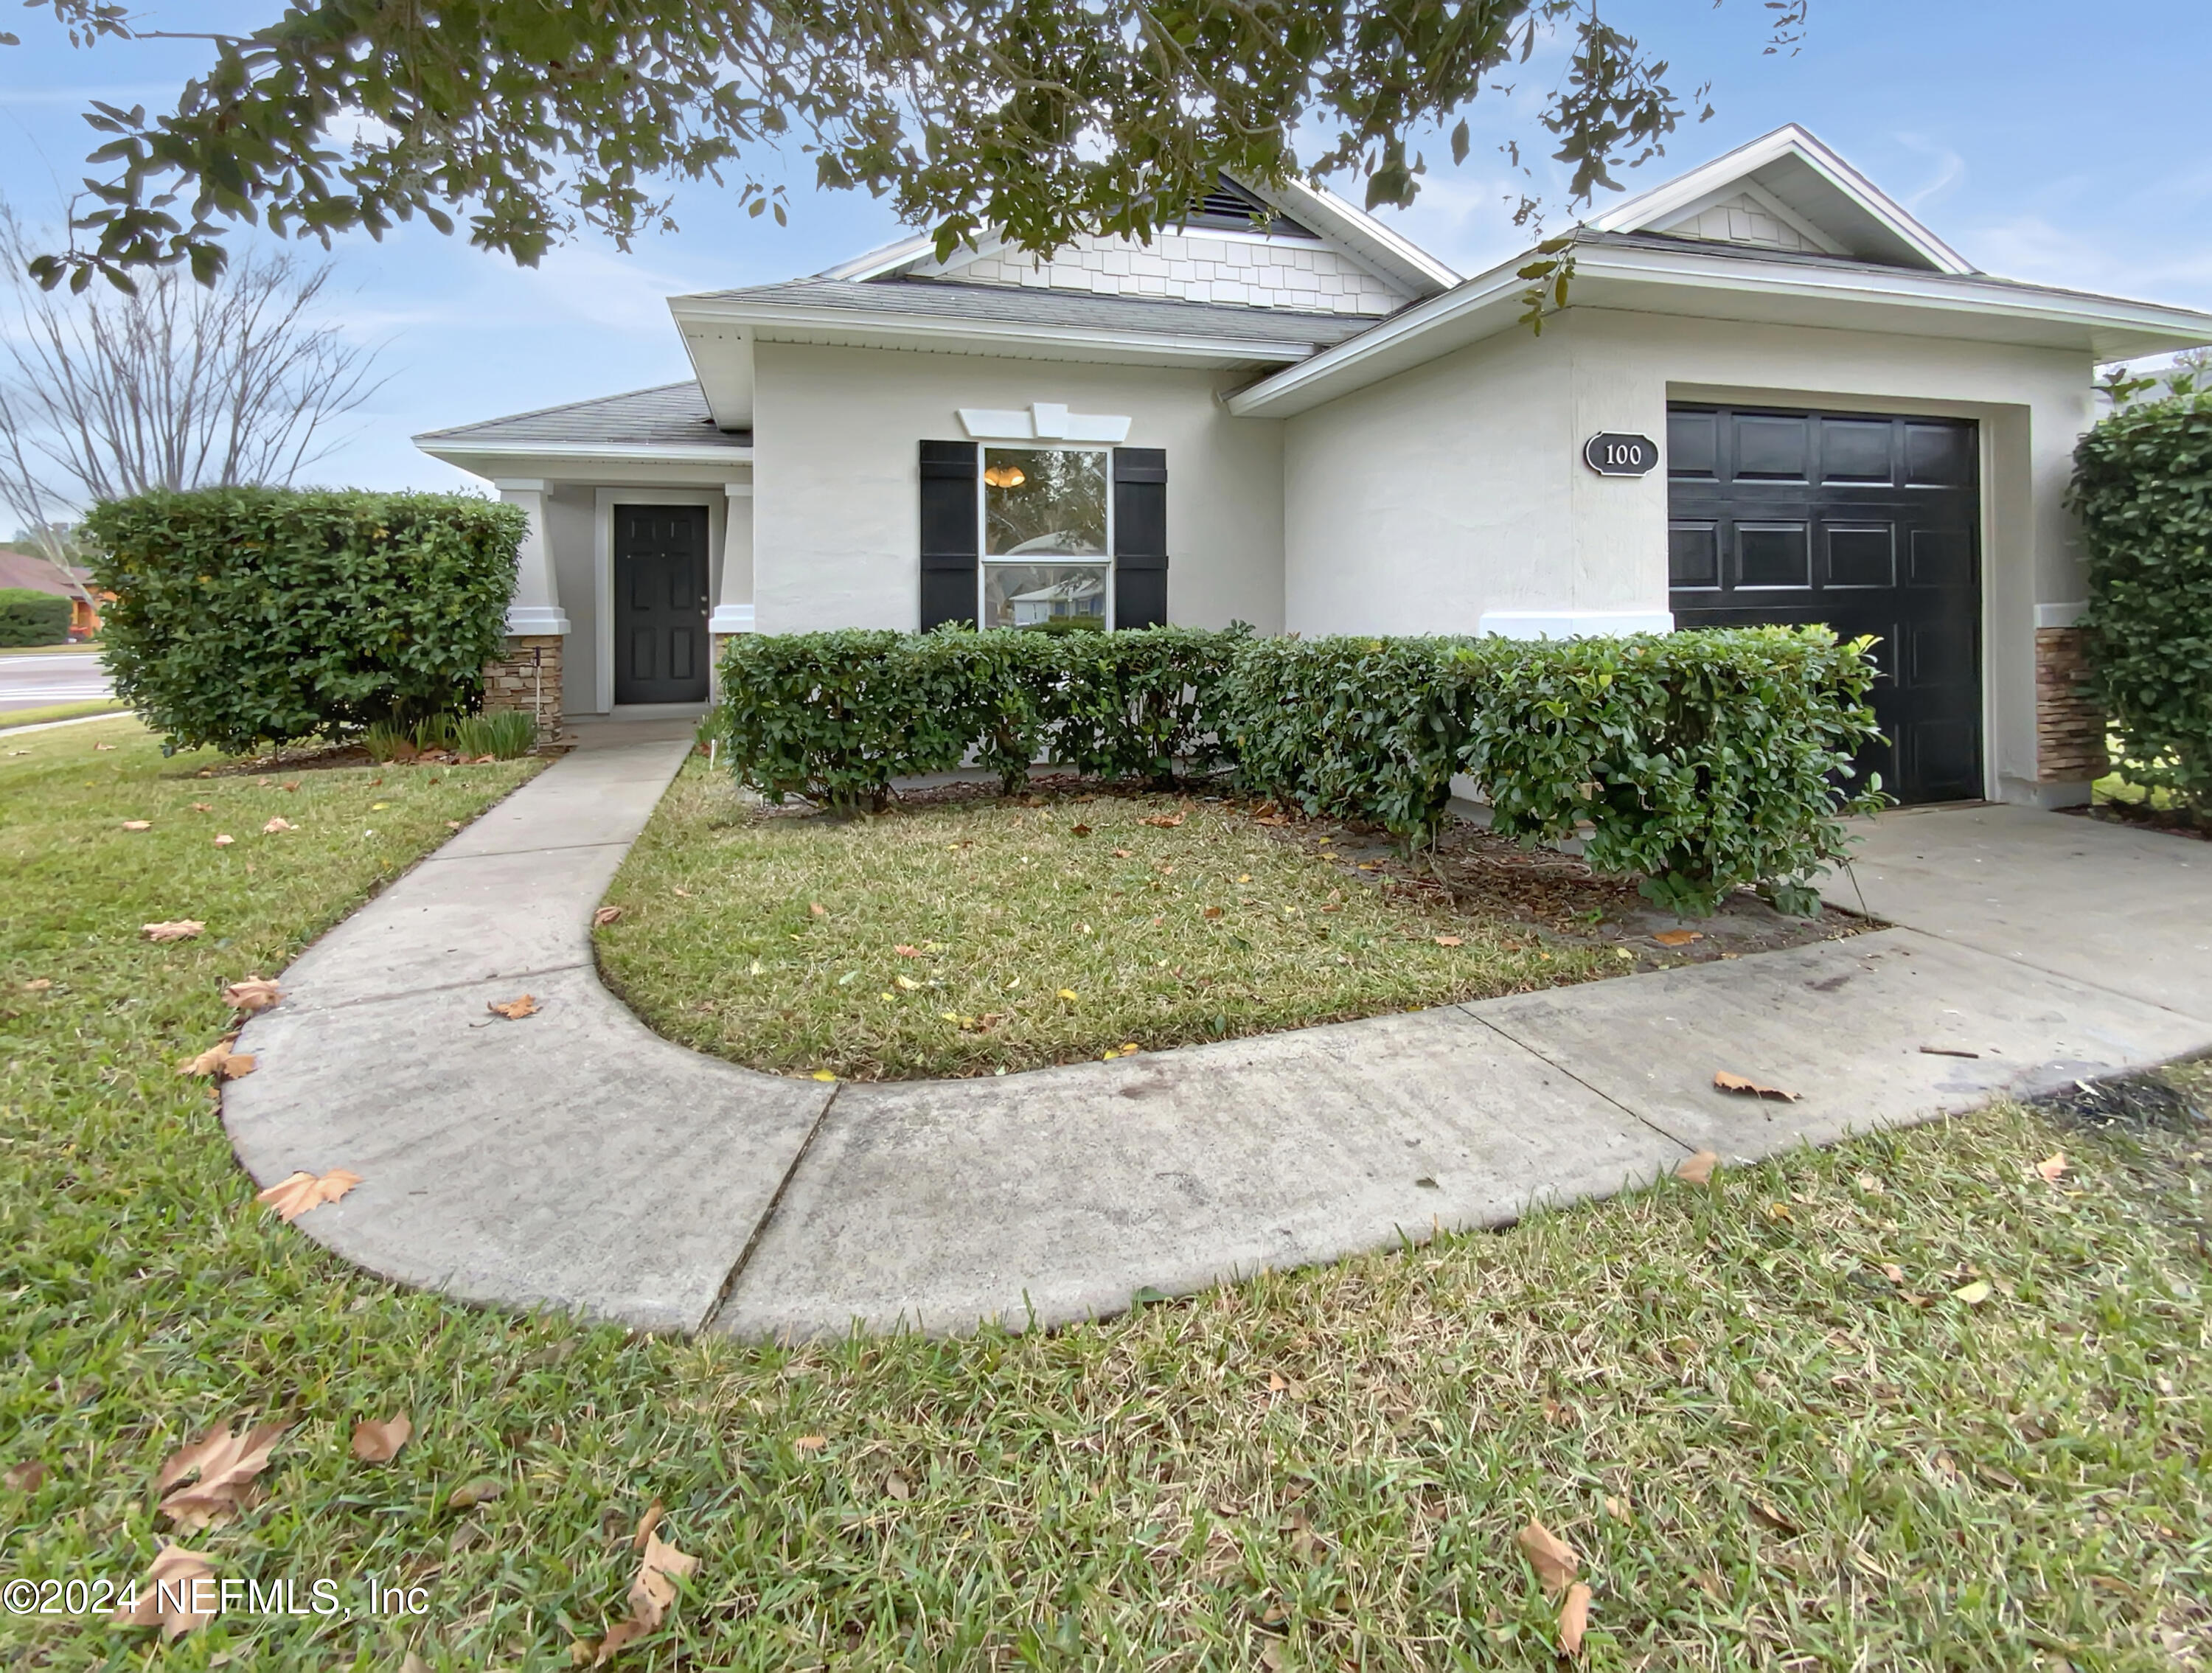 St Augustine, FL home for sale located at 100 BROOKFALL Drive, St Augustine, FL 32092